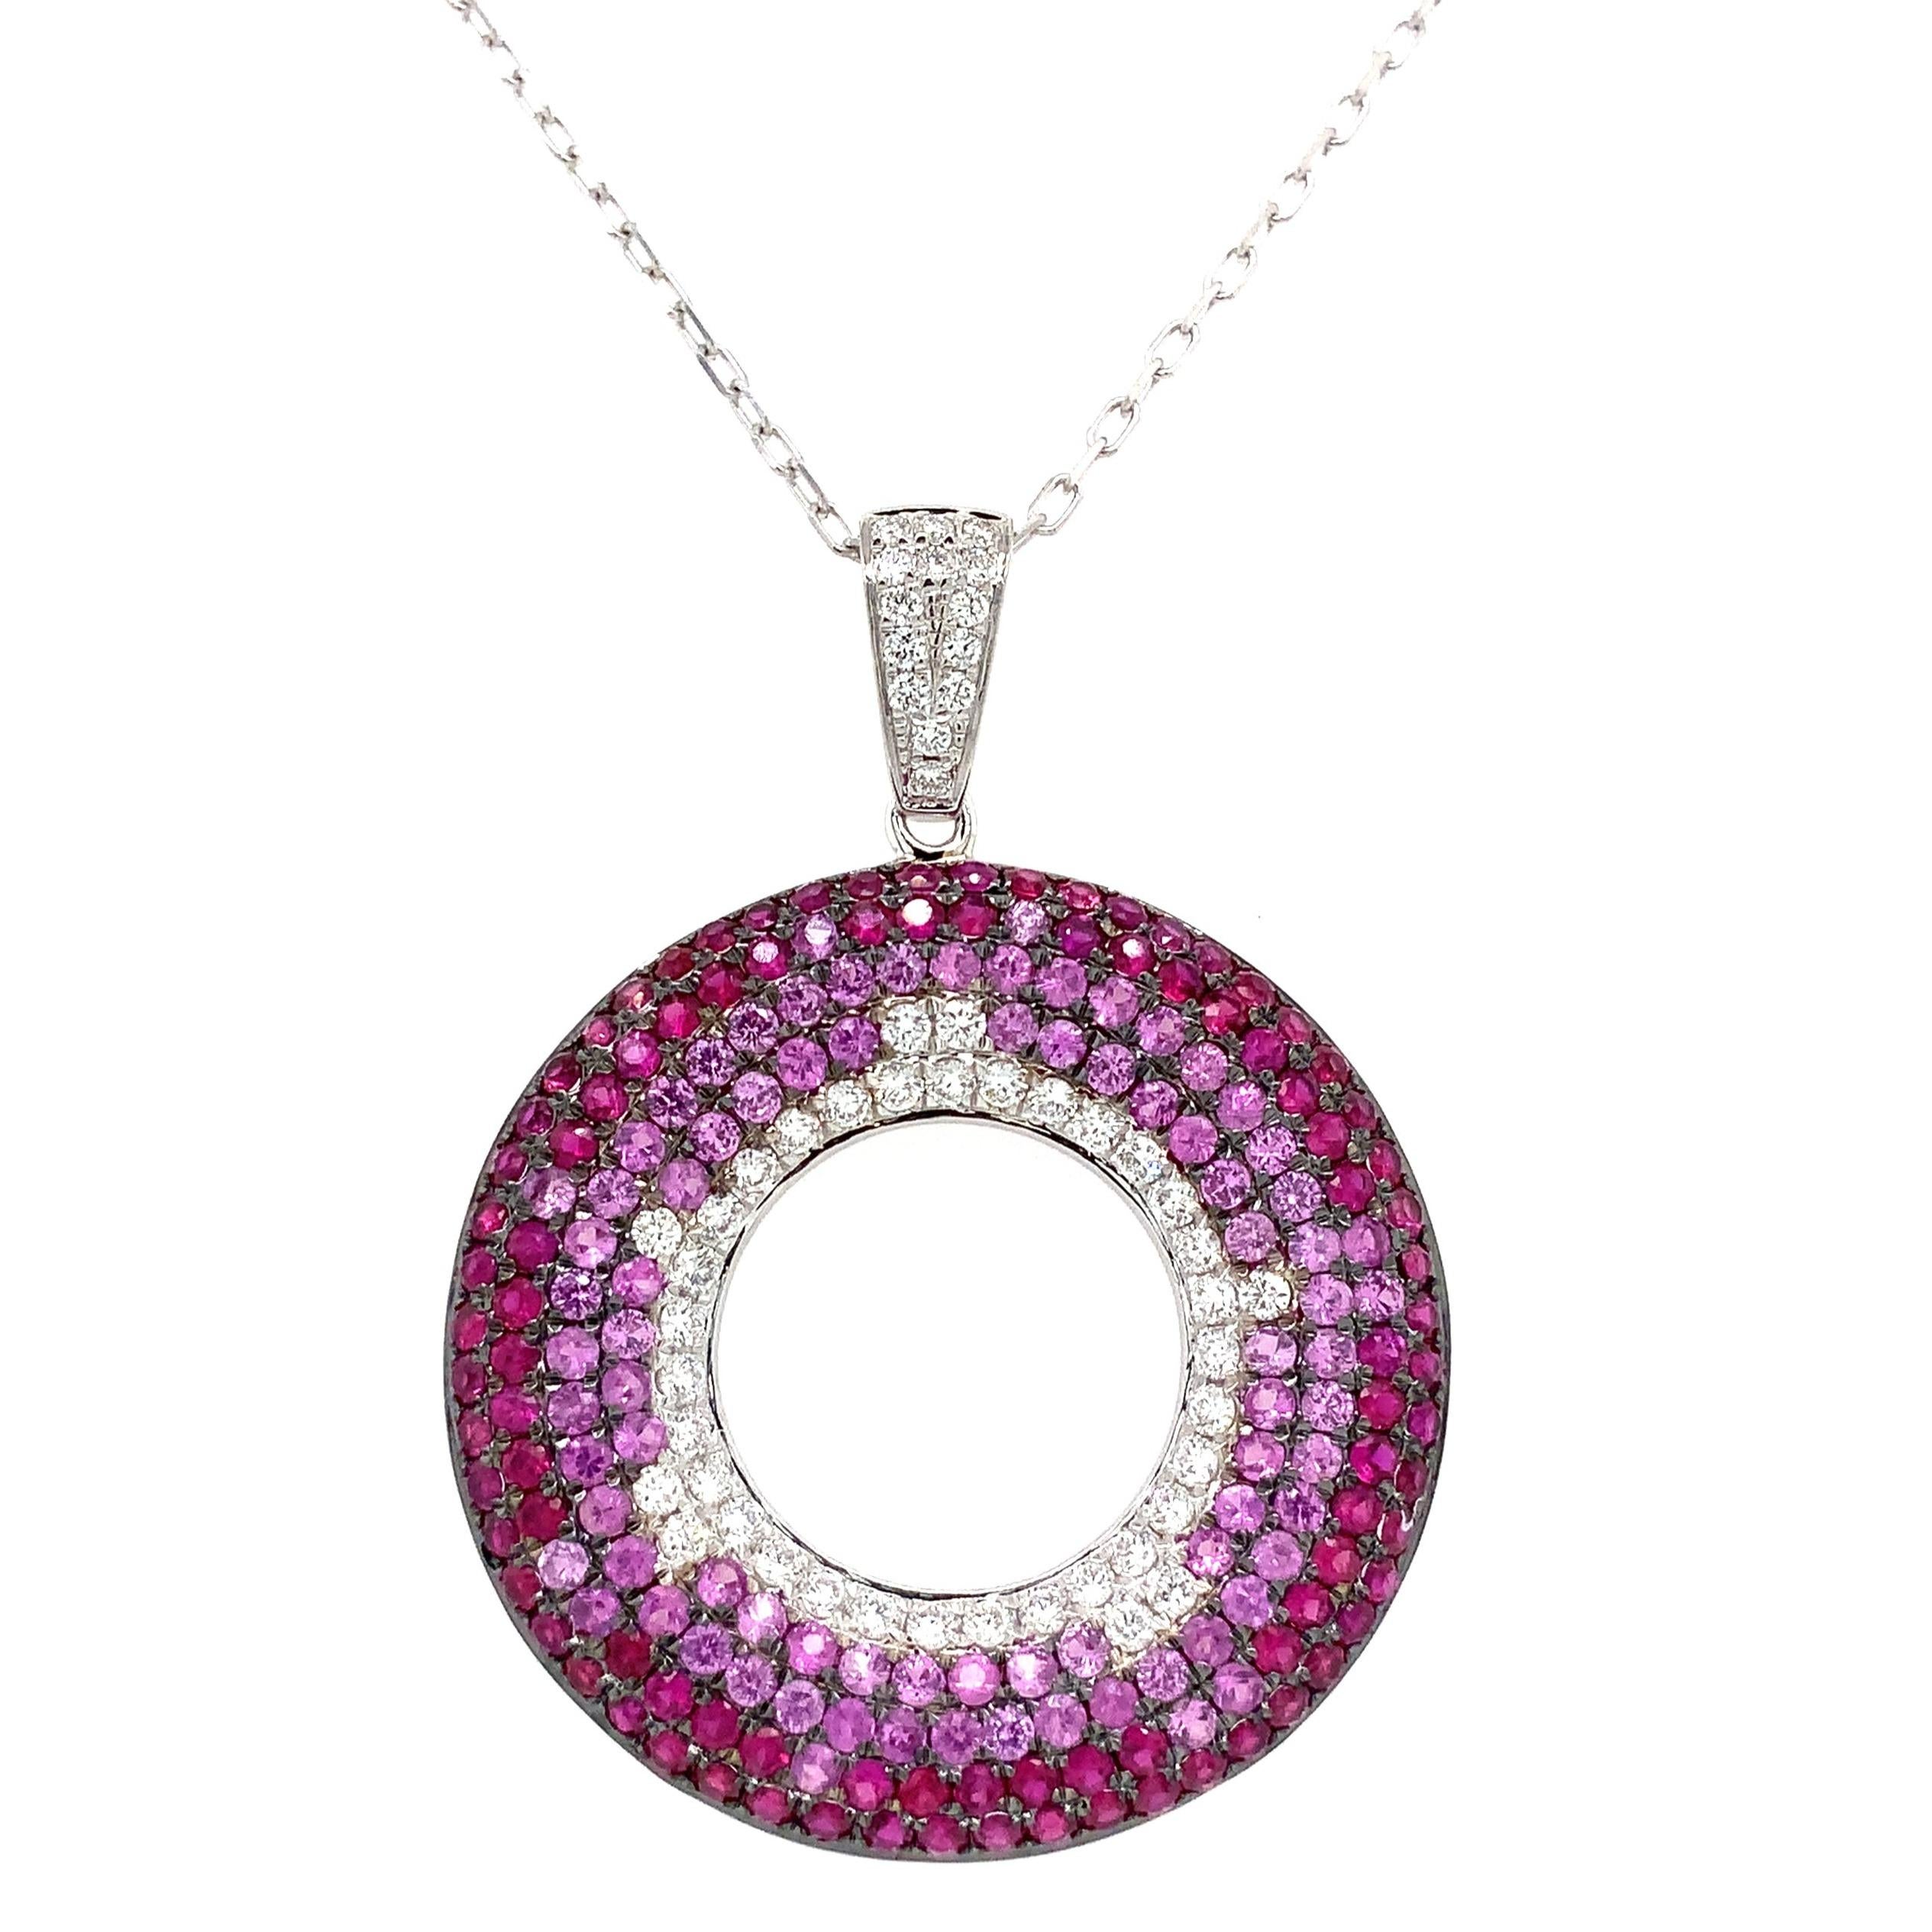 This Afarin Collection Ambre Pavé Set boasts a feminine circle of life design with Pink Sapphire and Diamond accents set in 18K White Gold.
179 Round Ruby and Pink Sapphire =3.06 cts. total weight
53 Round Brilliant Cut Diamond = 0.60 ct. total